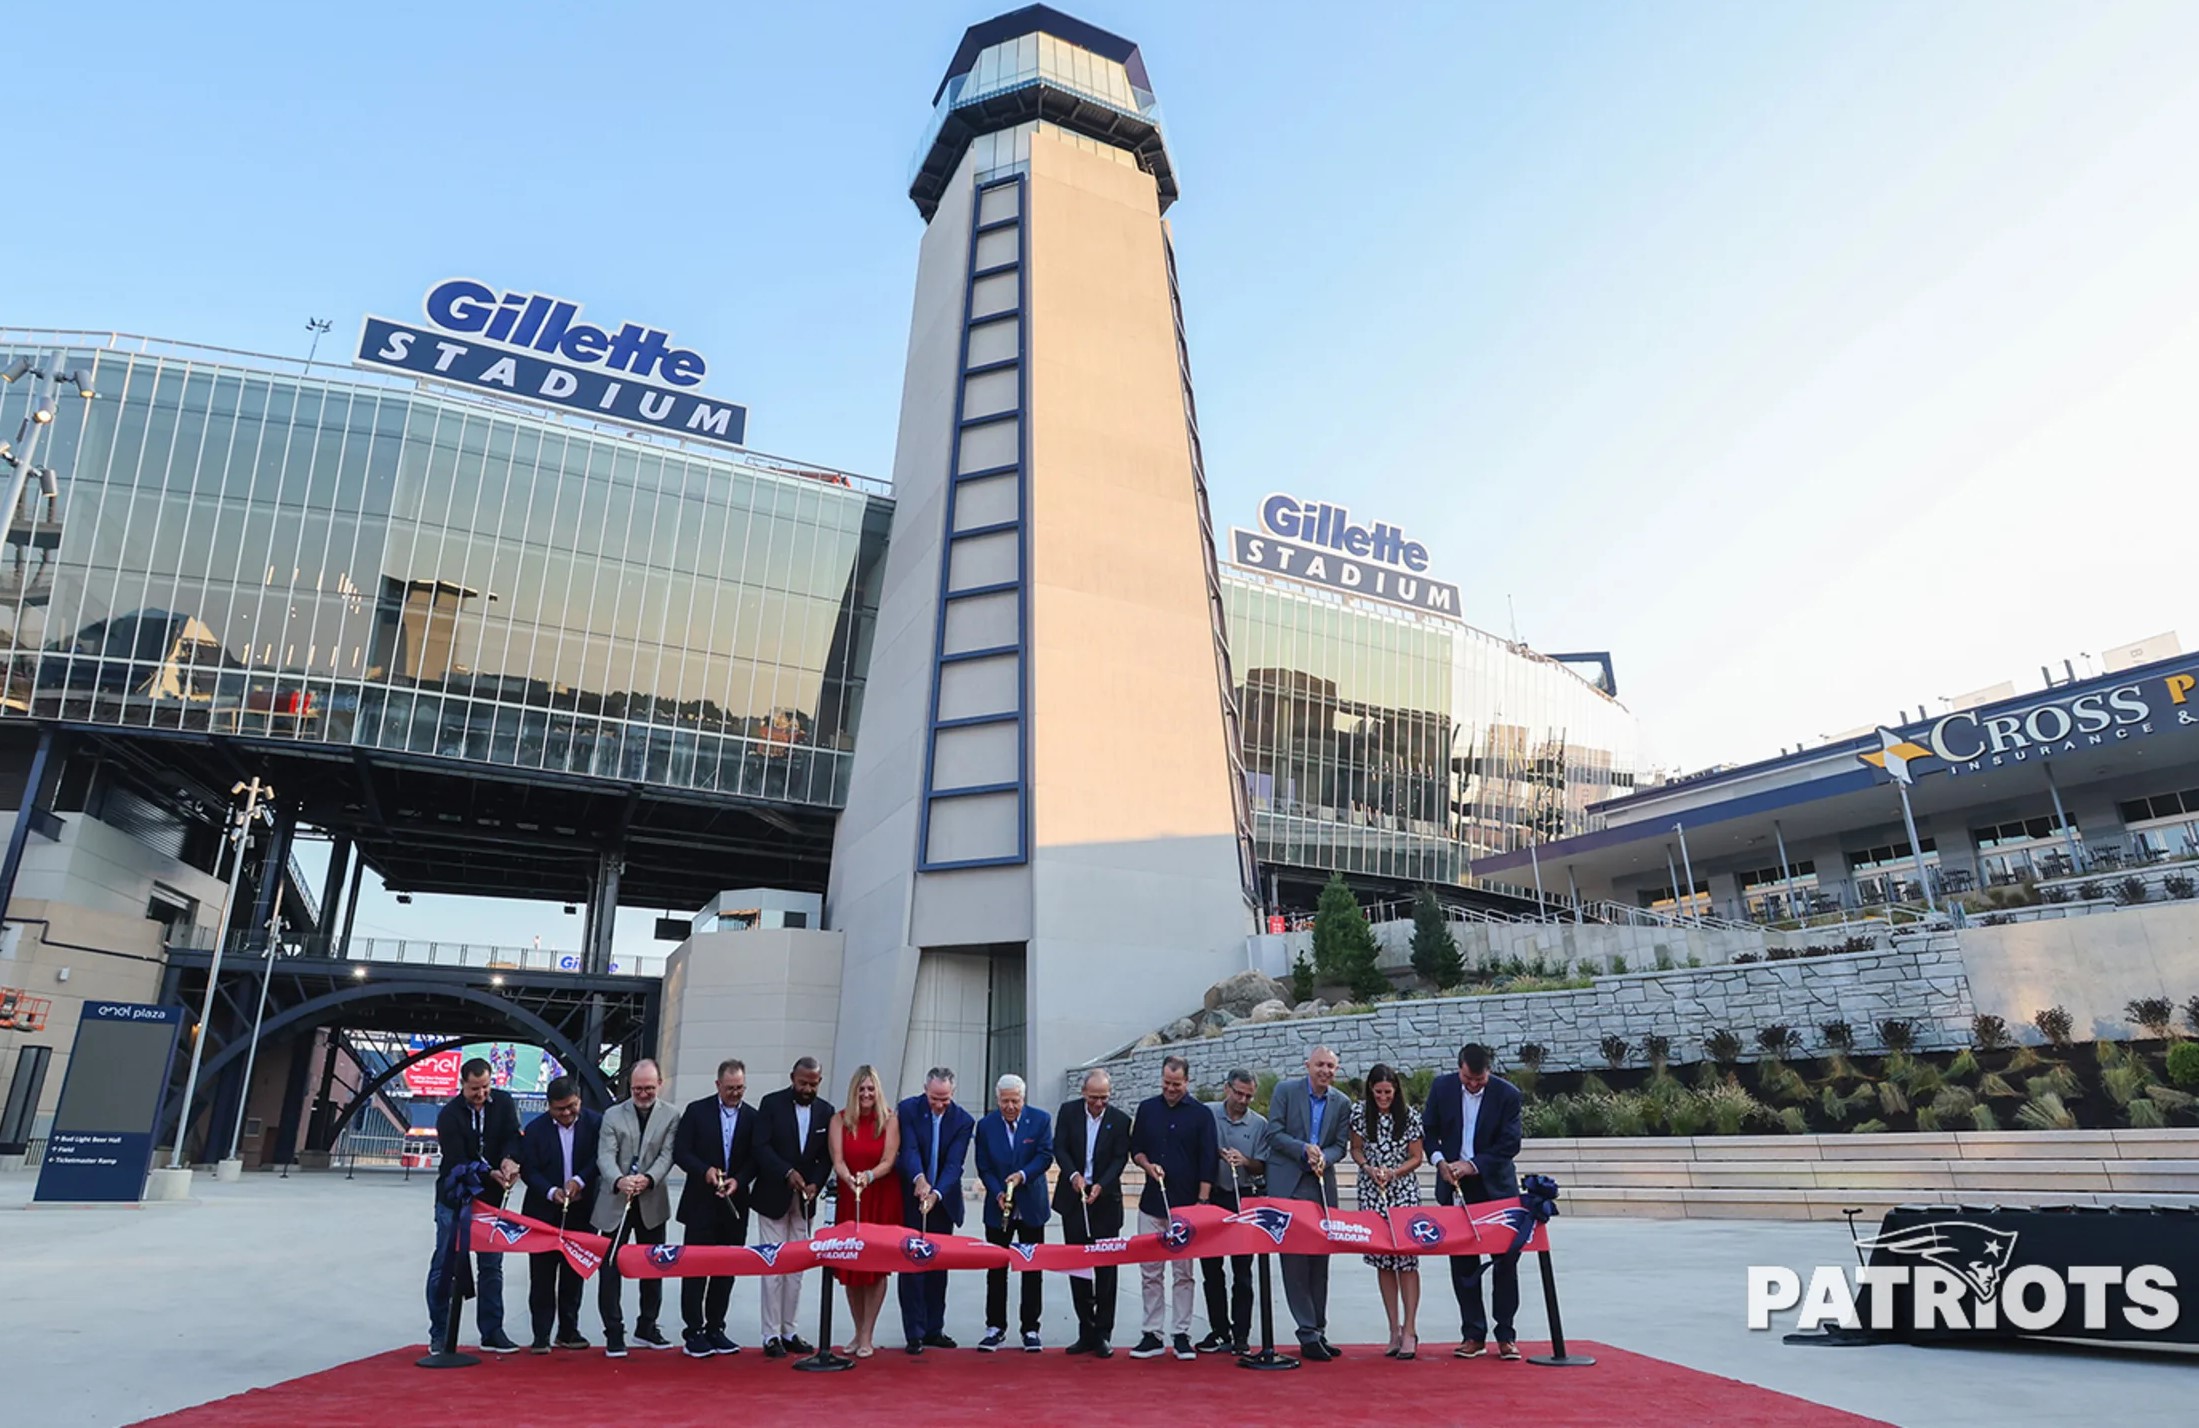 Gillette Stadium Upgrades Row of Honor As Part of $250M Project